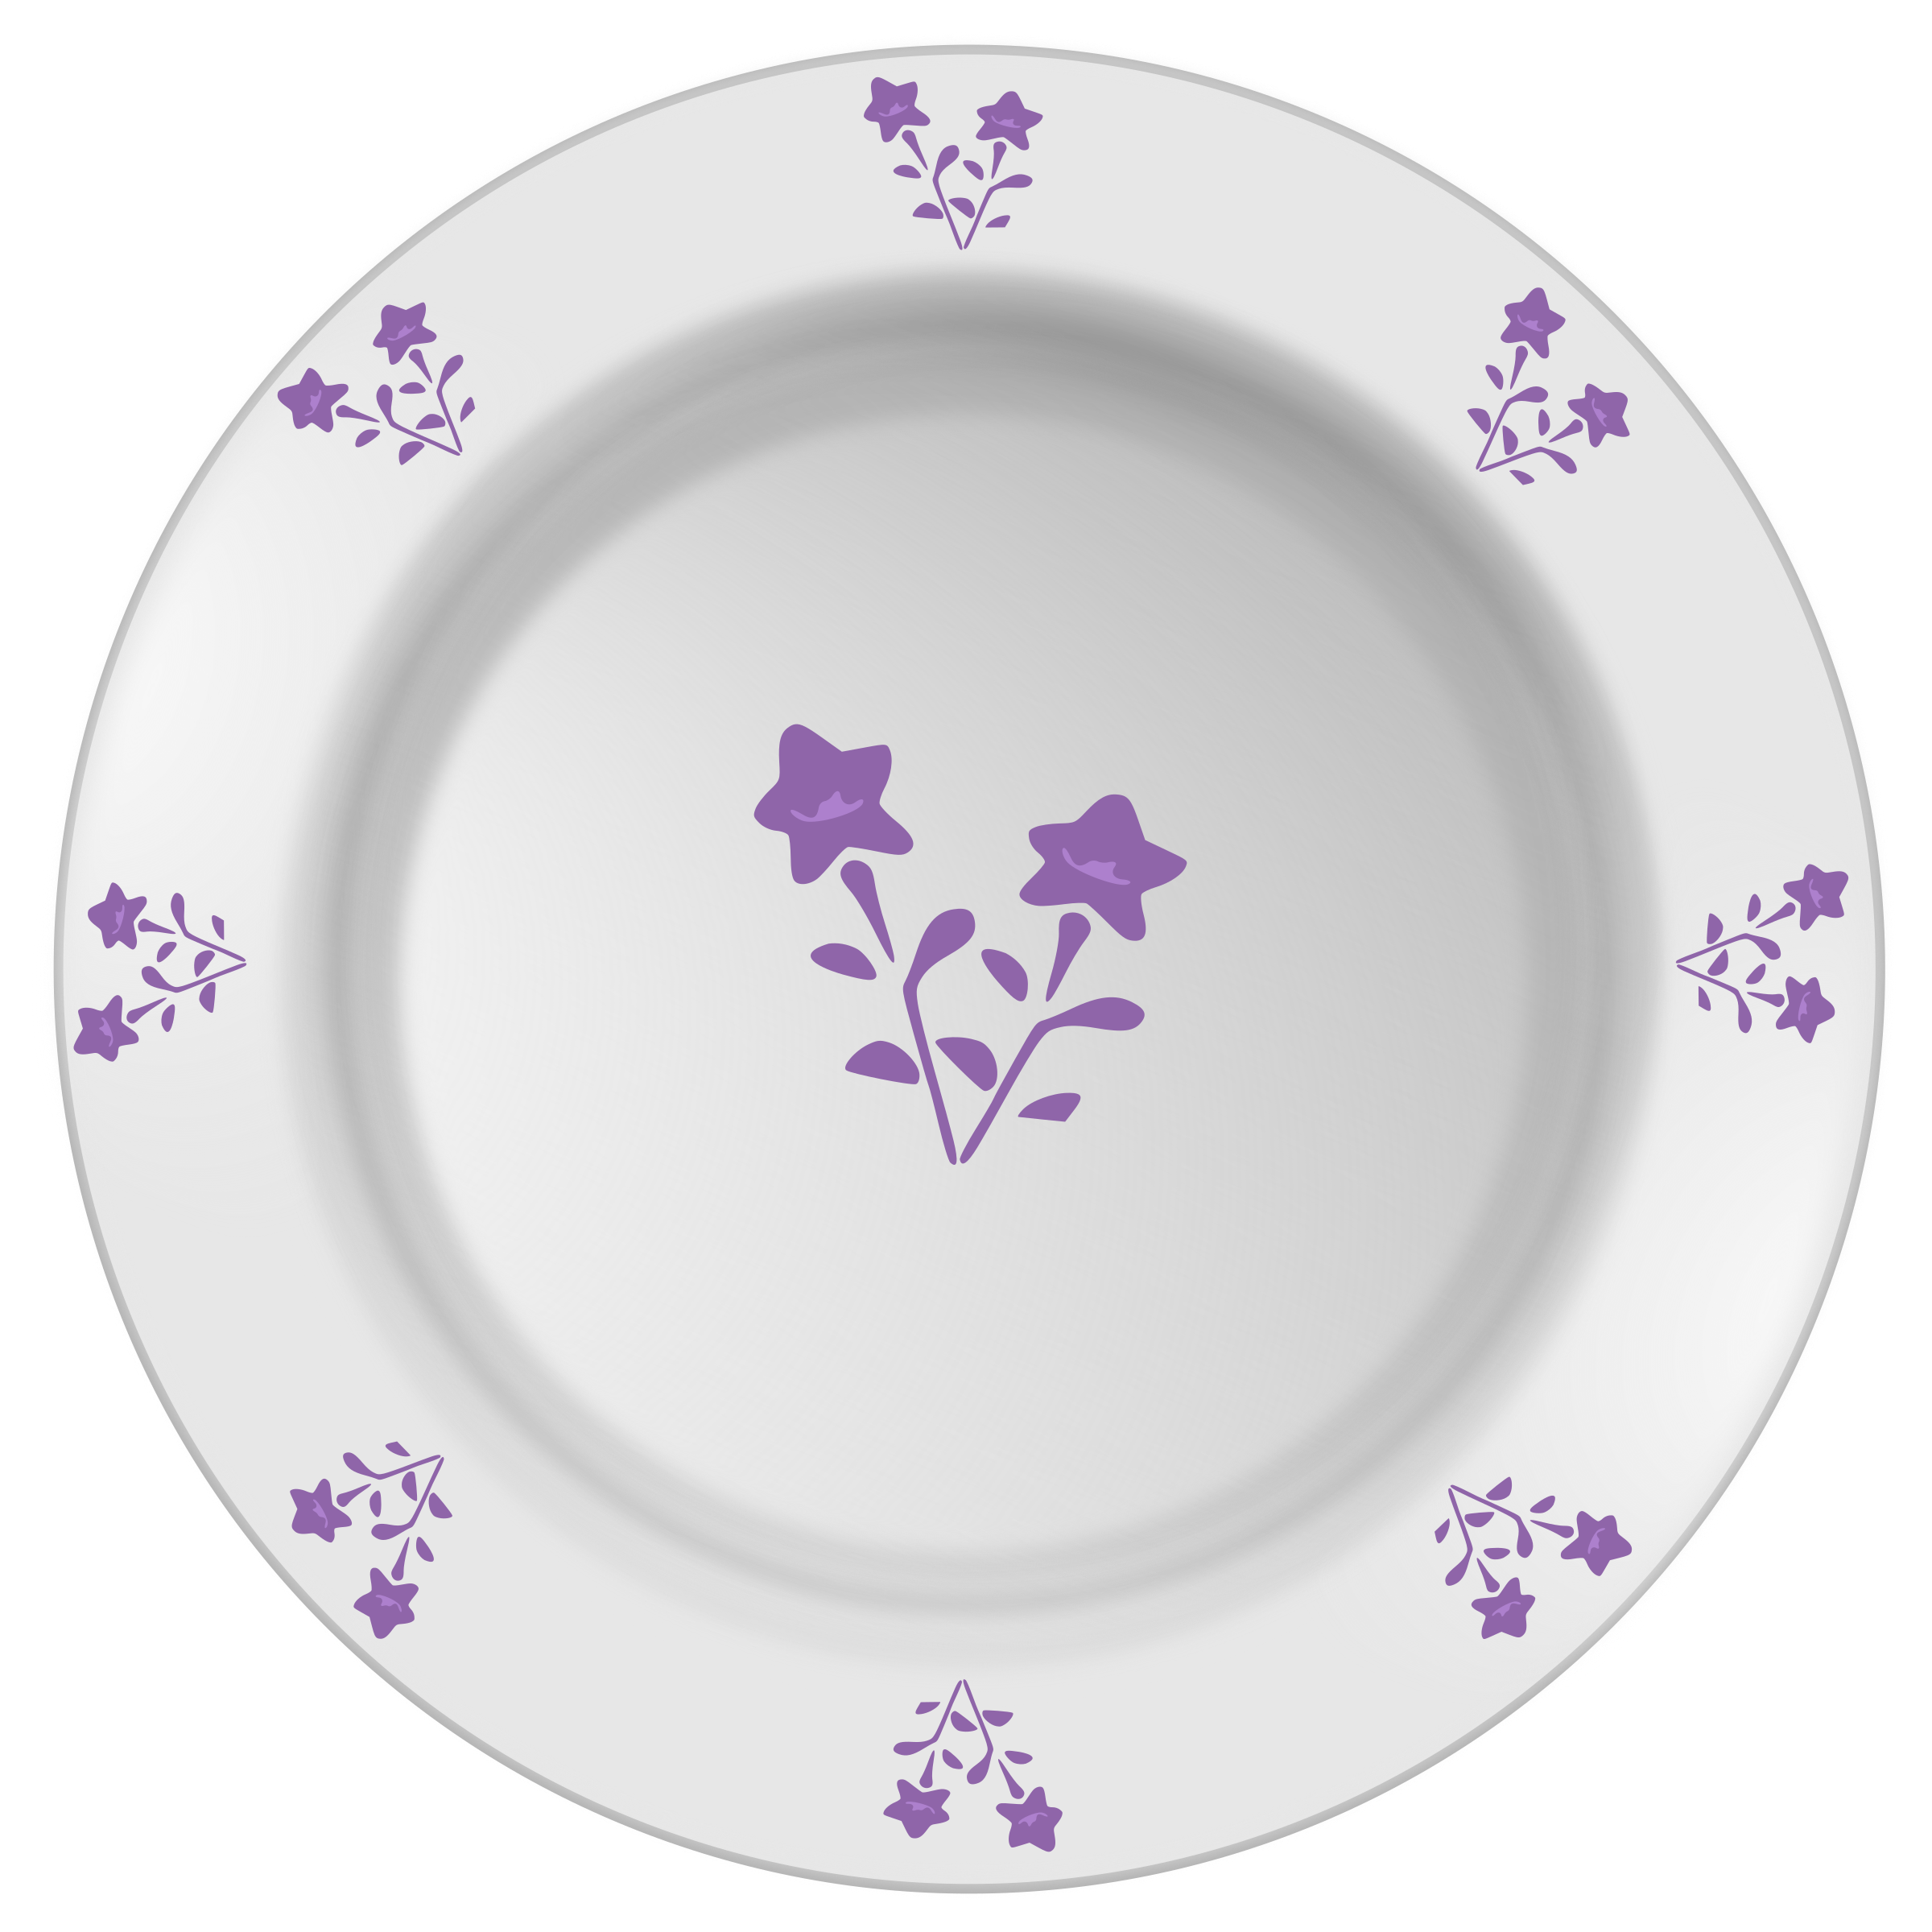 plate clipart svg